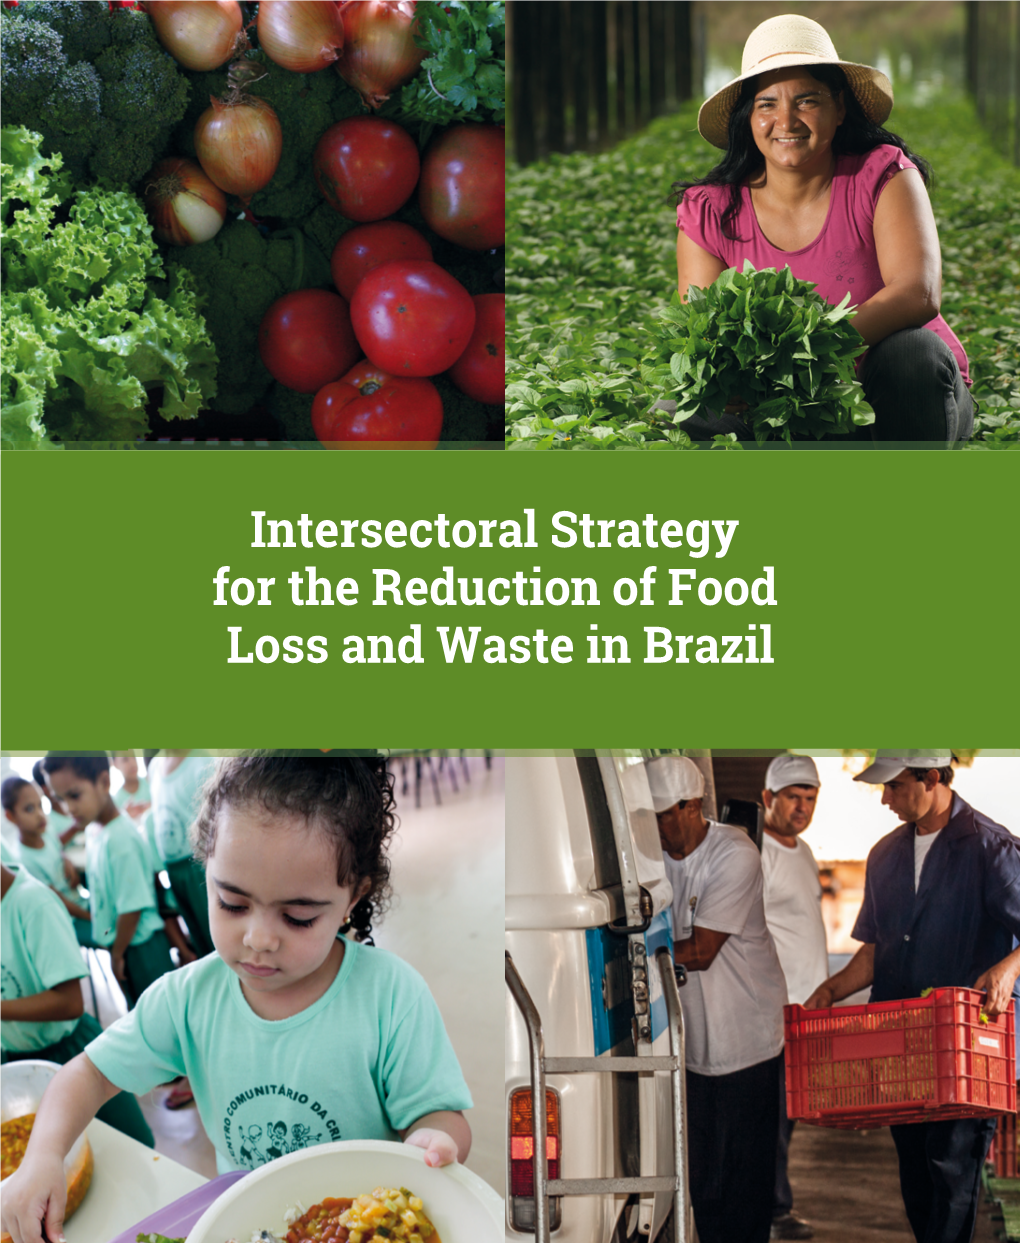 Intersectoral Strategy for the Reduction of Food Loss and Waste